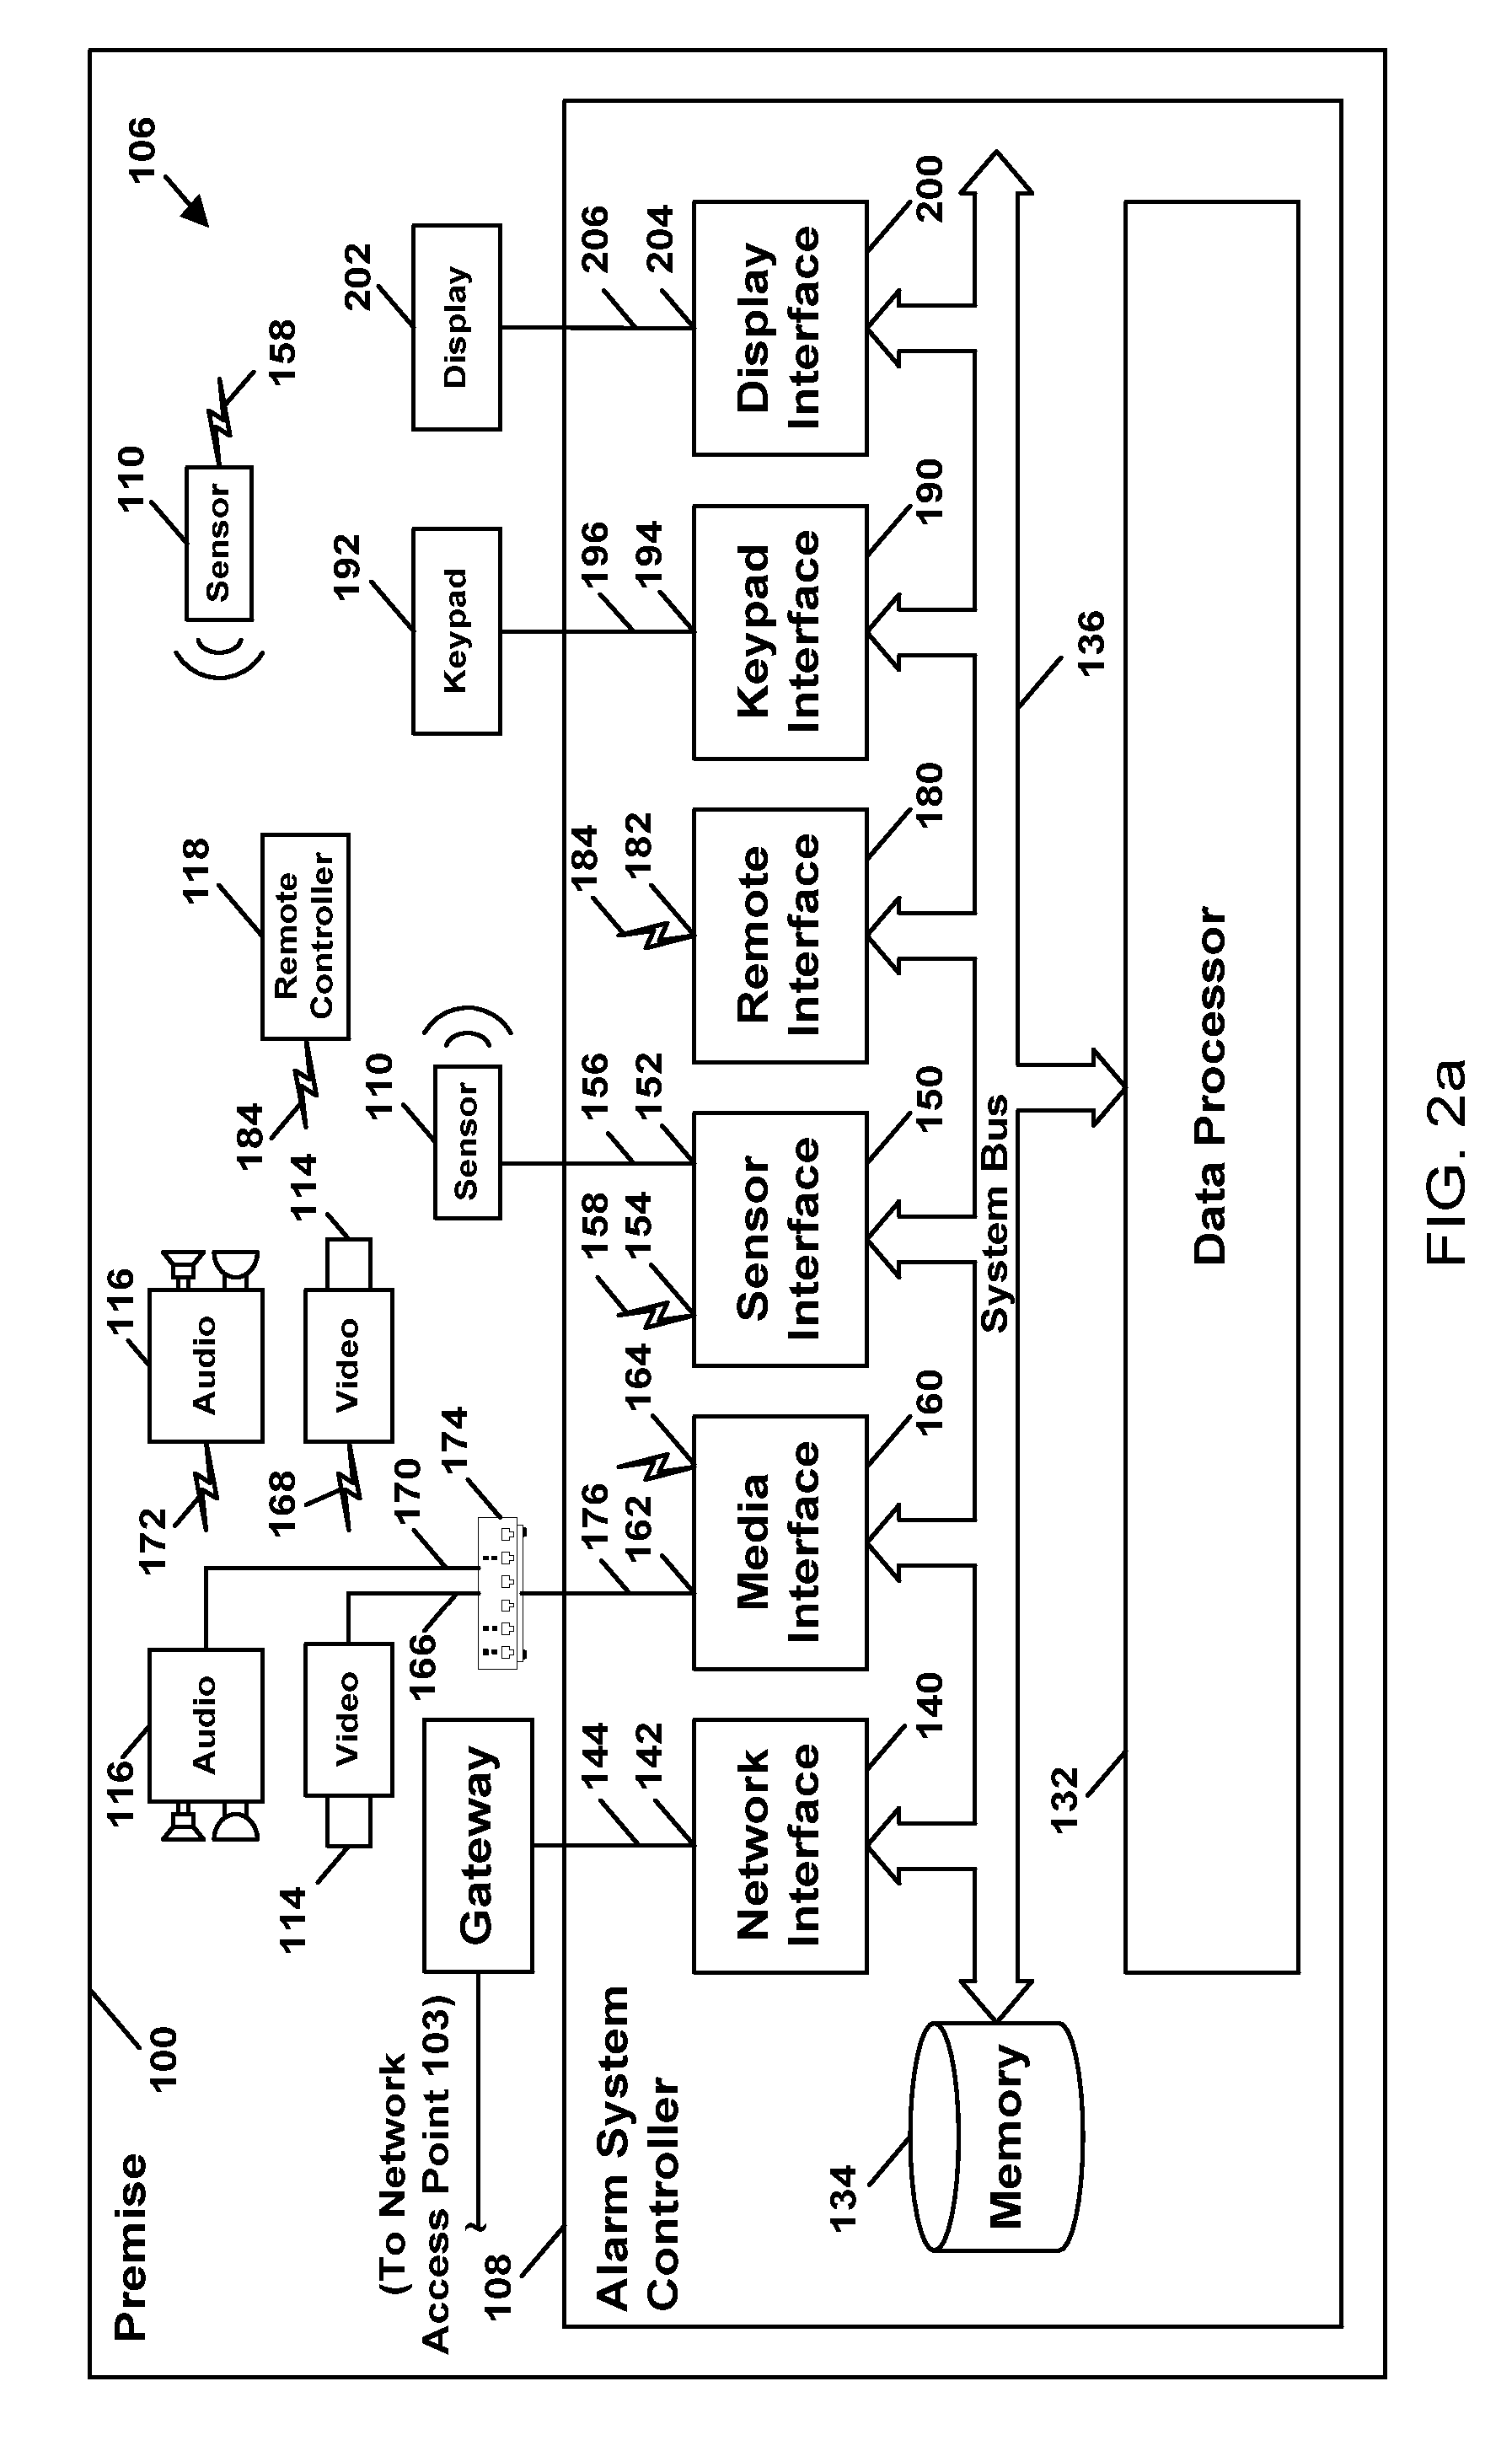 Method and system for an insurance auditor to audit a premise alarm system